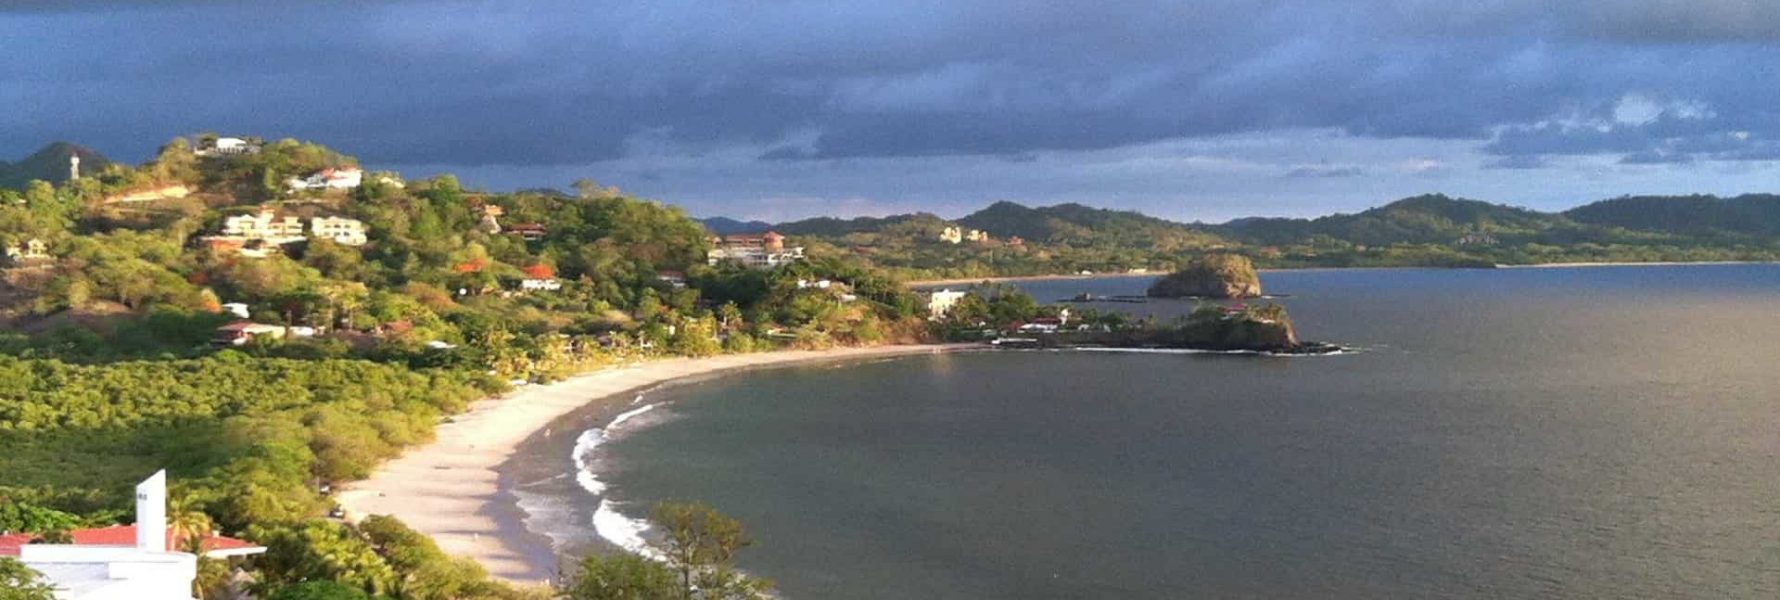 The Pacific coastline is certainly one of the most scenic sides to Costa Rica you can enjoy on your next vacation.